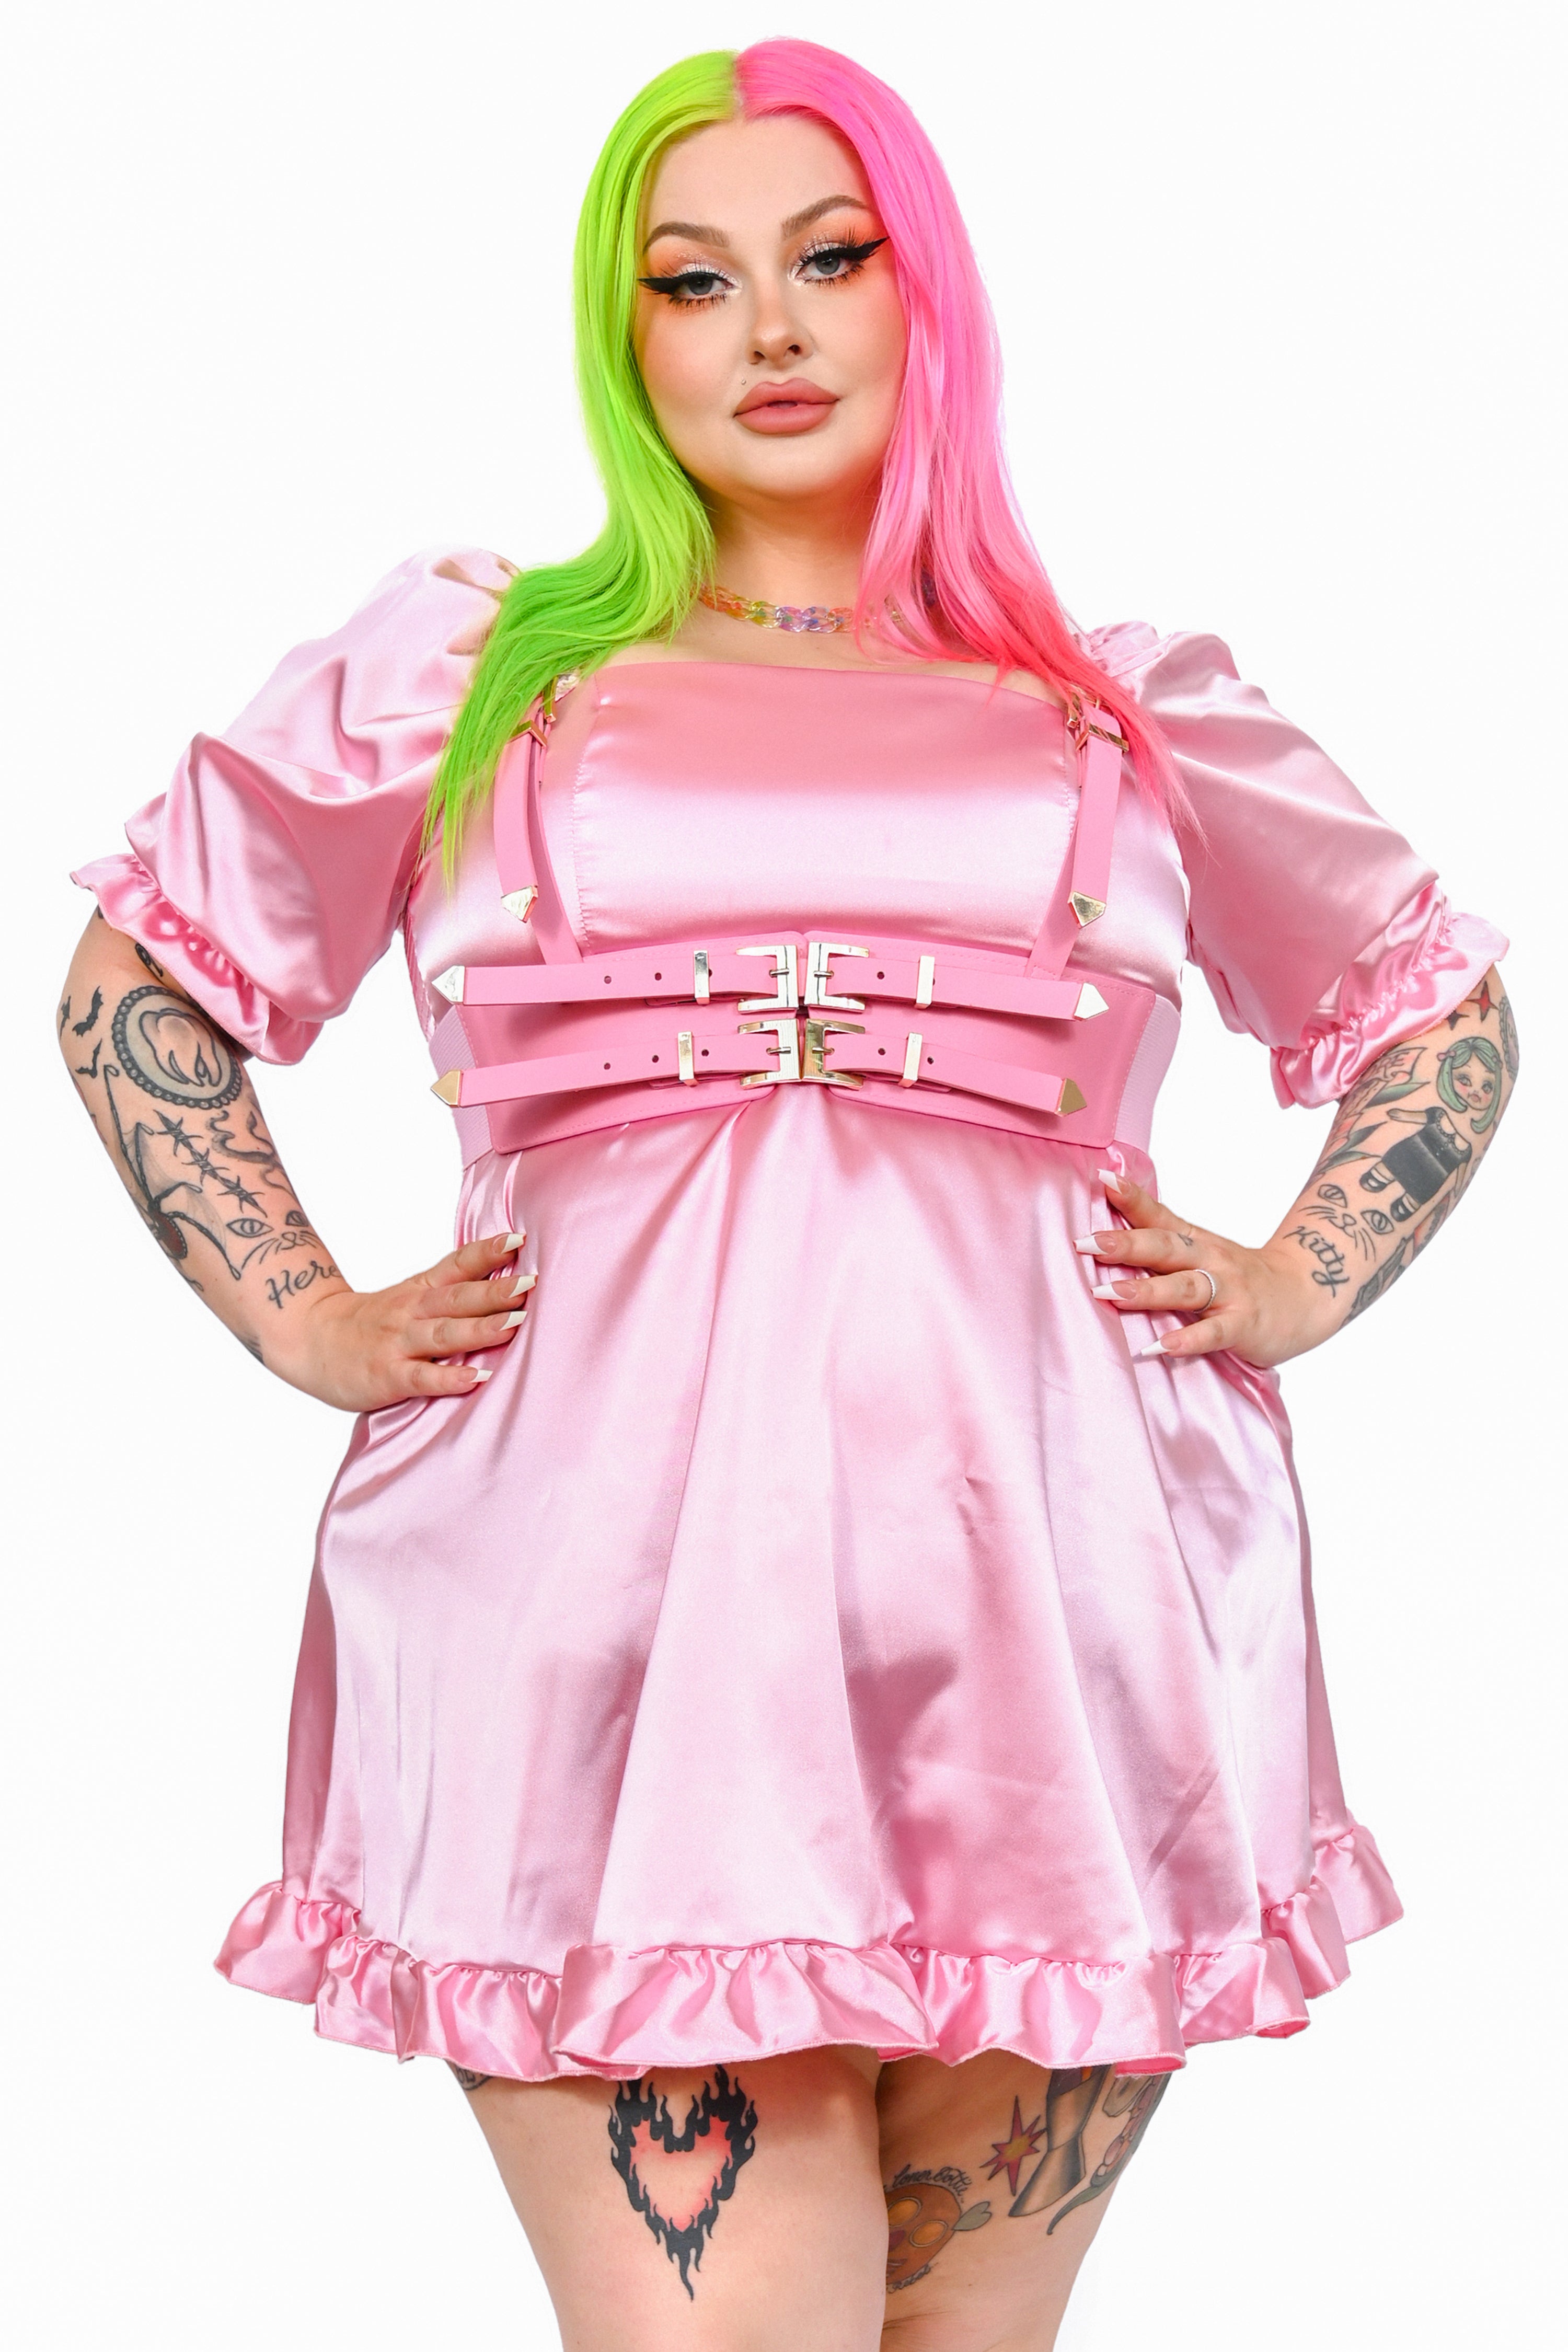 Baby pink satin babydoll dress with a square neckline, poofy sleeves with ruffle trim!